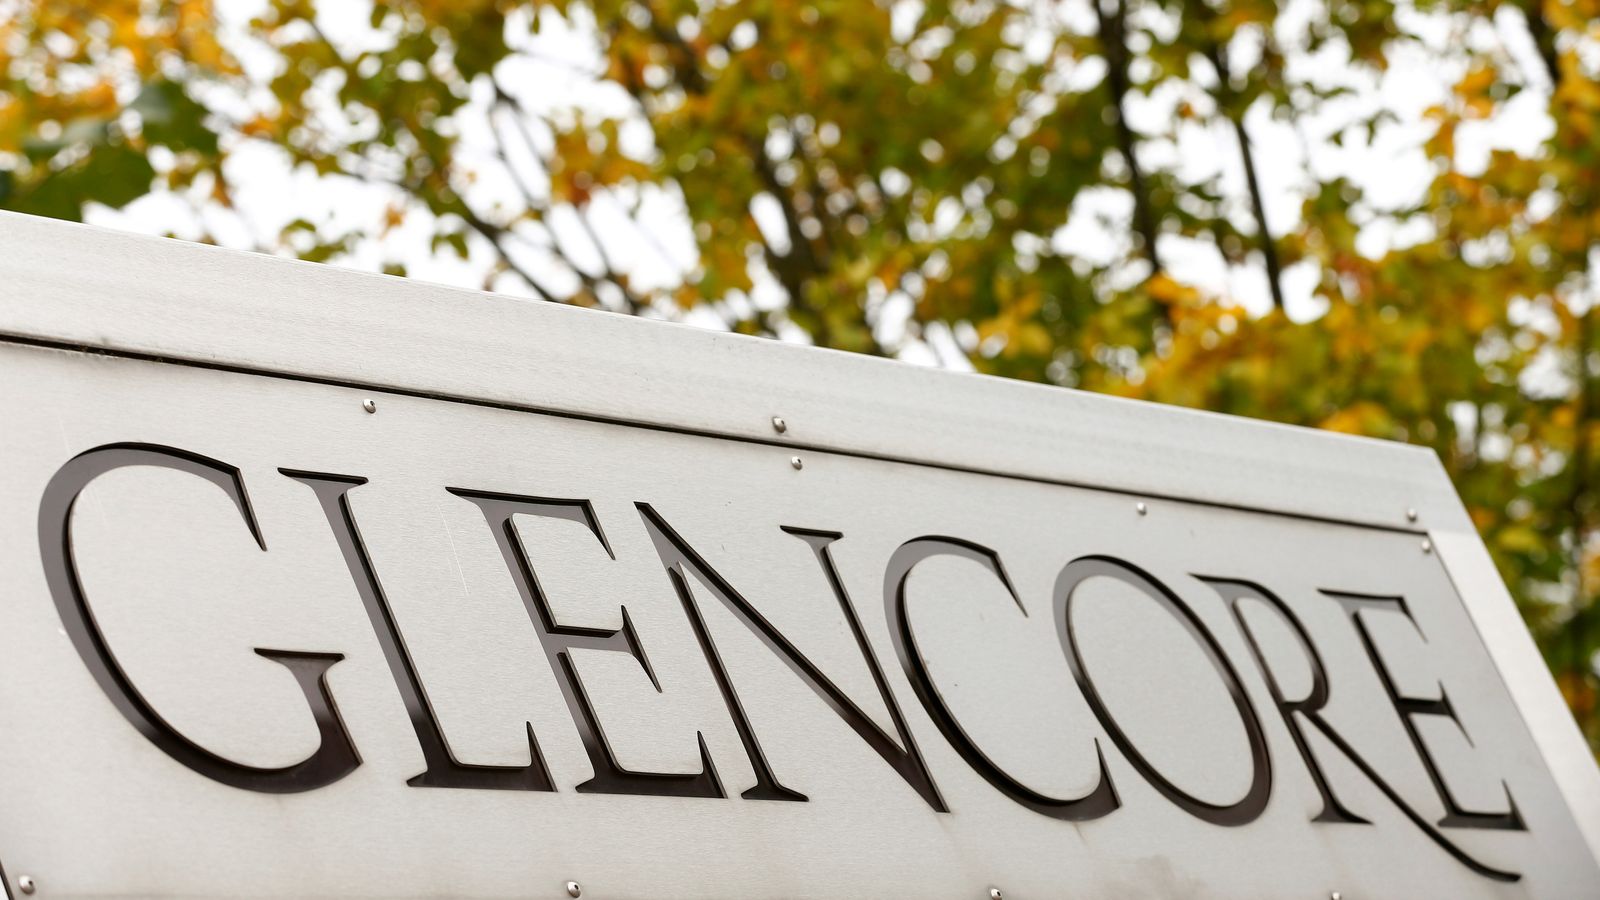 Glencore 'to admit' charges related to alleged $25m bribes for oil contracts